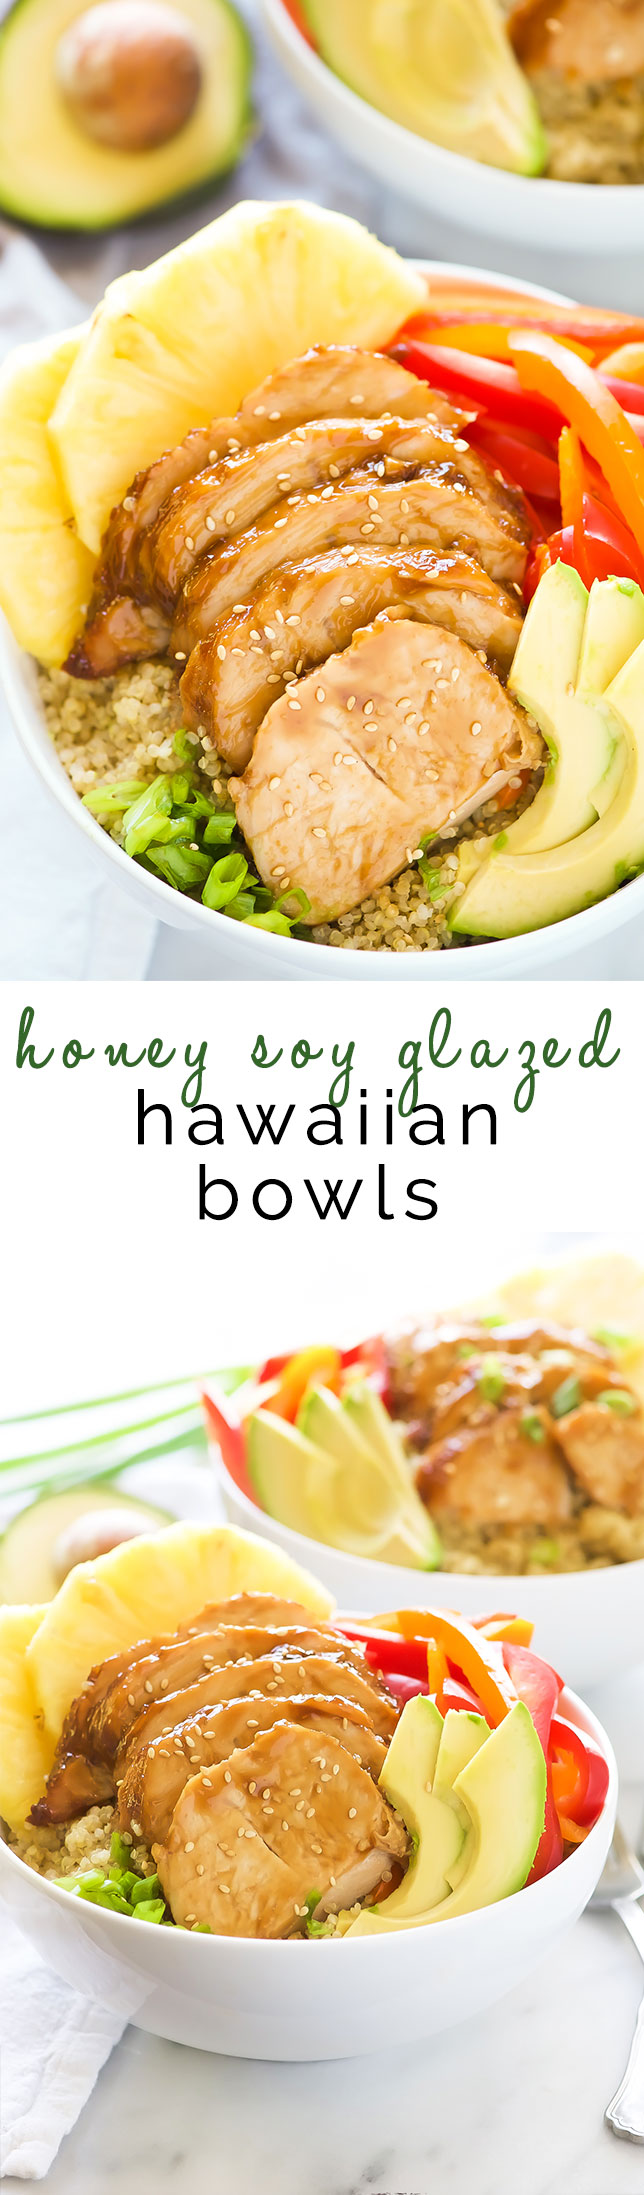 Honey Soy Glazed Hawaiian Bowls pack a serious flavor punch! Honey soy glazed turkey tenderloins are baked then added to a bowl filled with rice, juicy pineapple, peppers, onions, and avocados. This one dish wonder is perfect for any weeknight dinner!